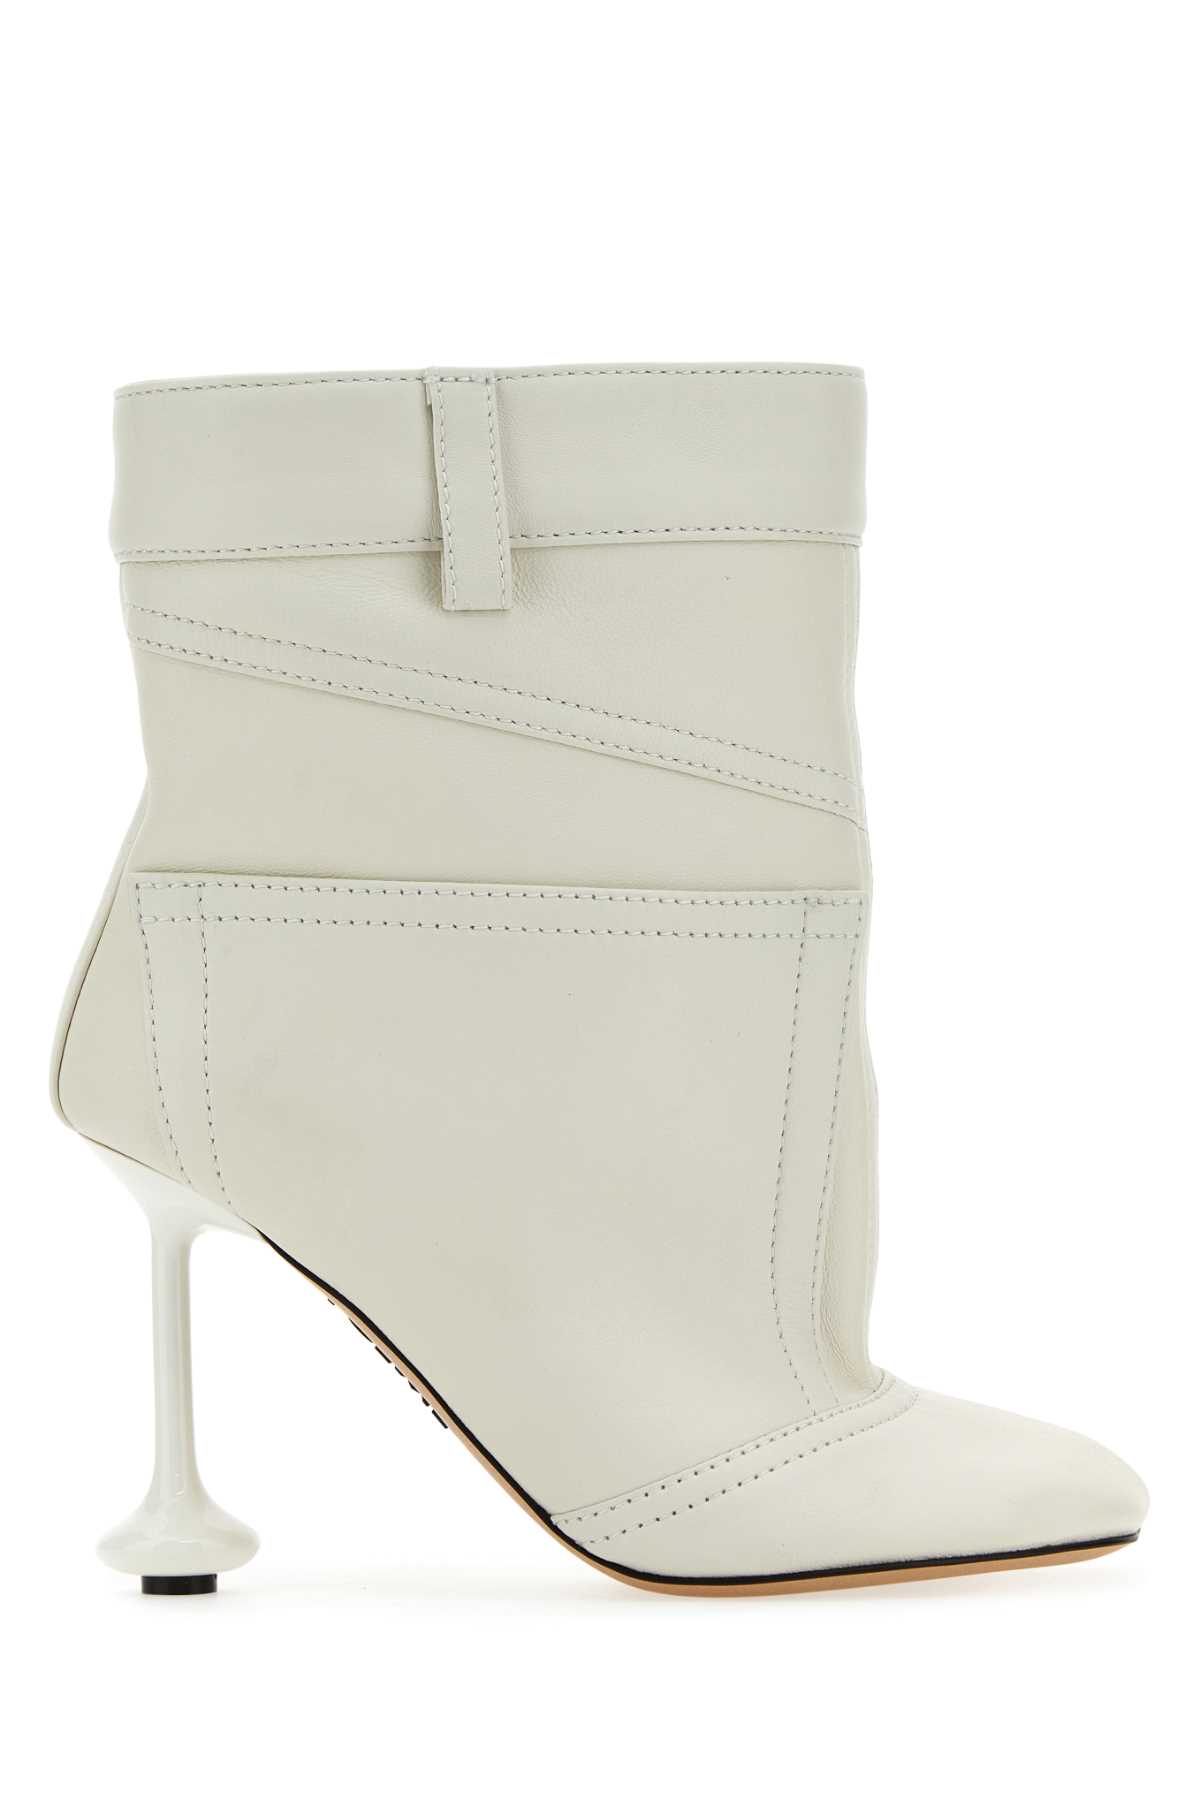 Loewe Ivory Nappa Leather Toy Ankle Boots